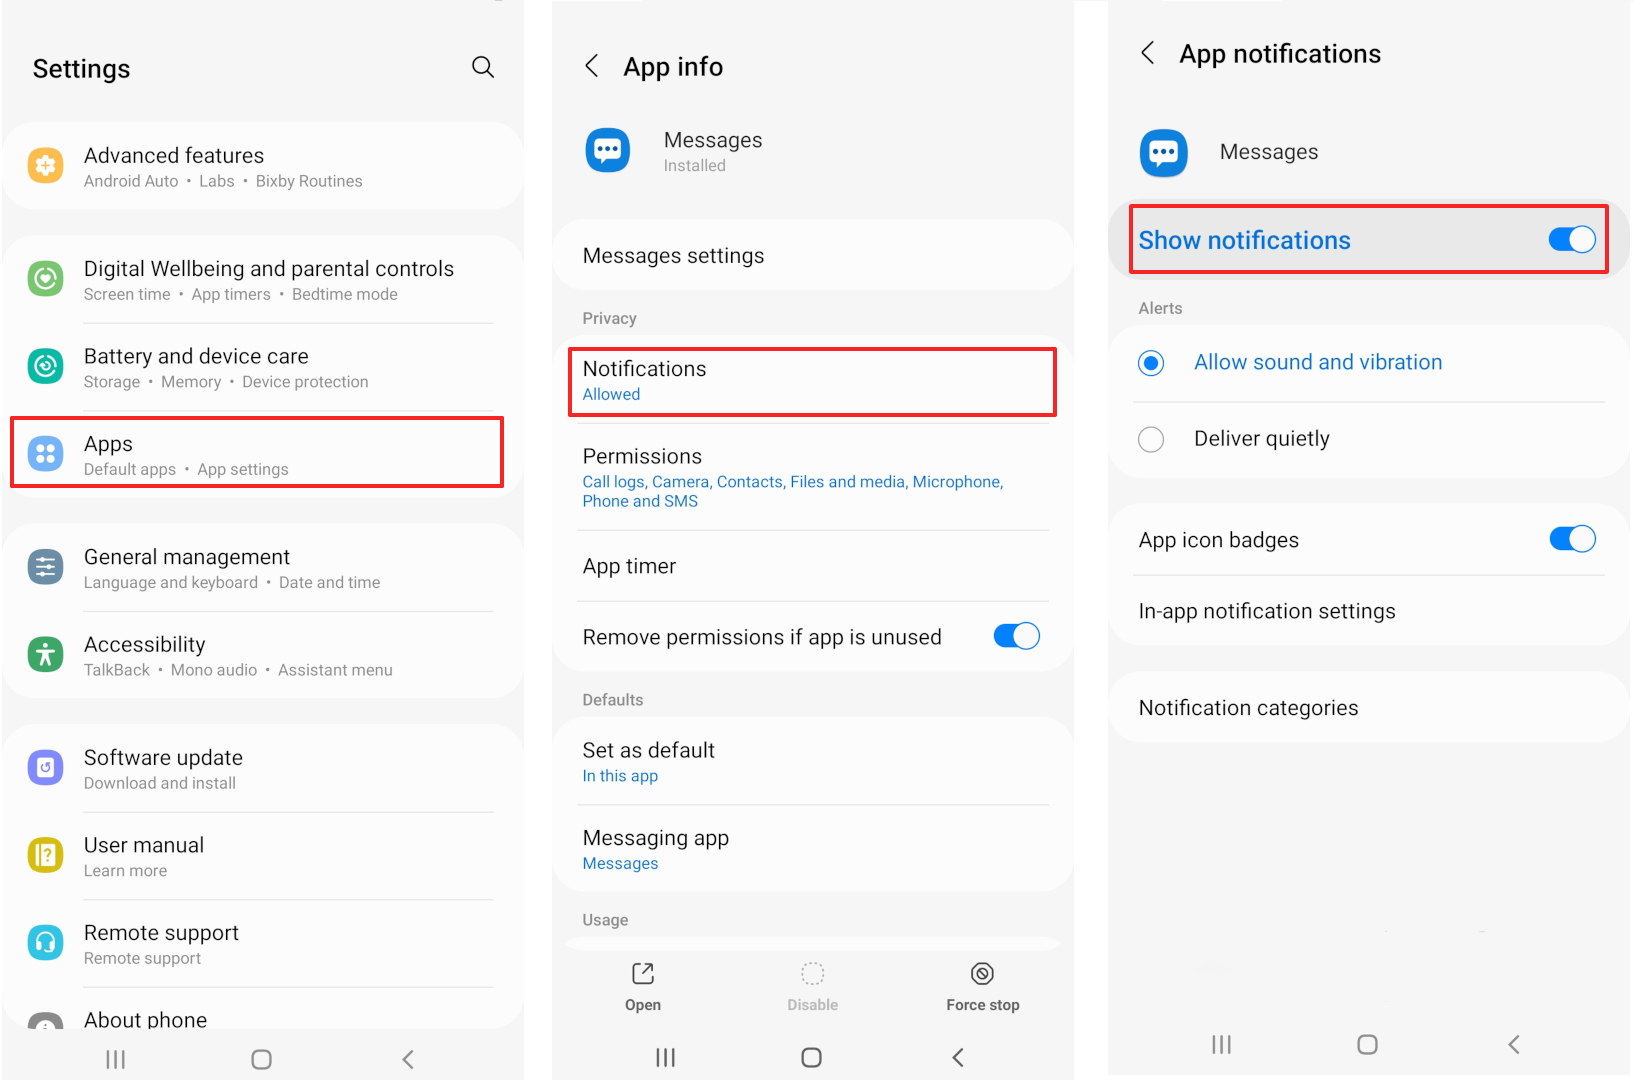 The notification settings for apps on Android